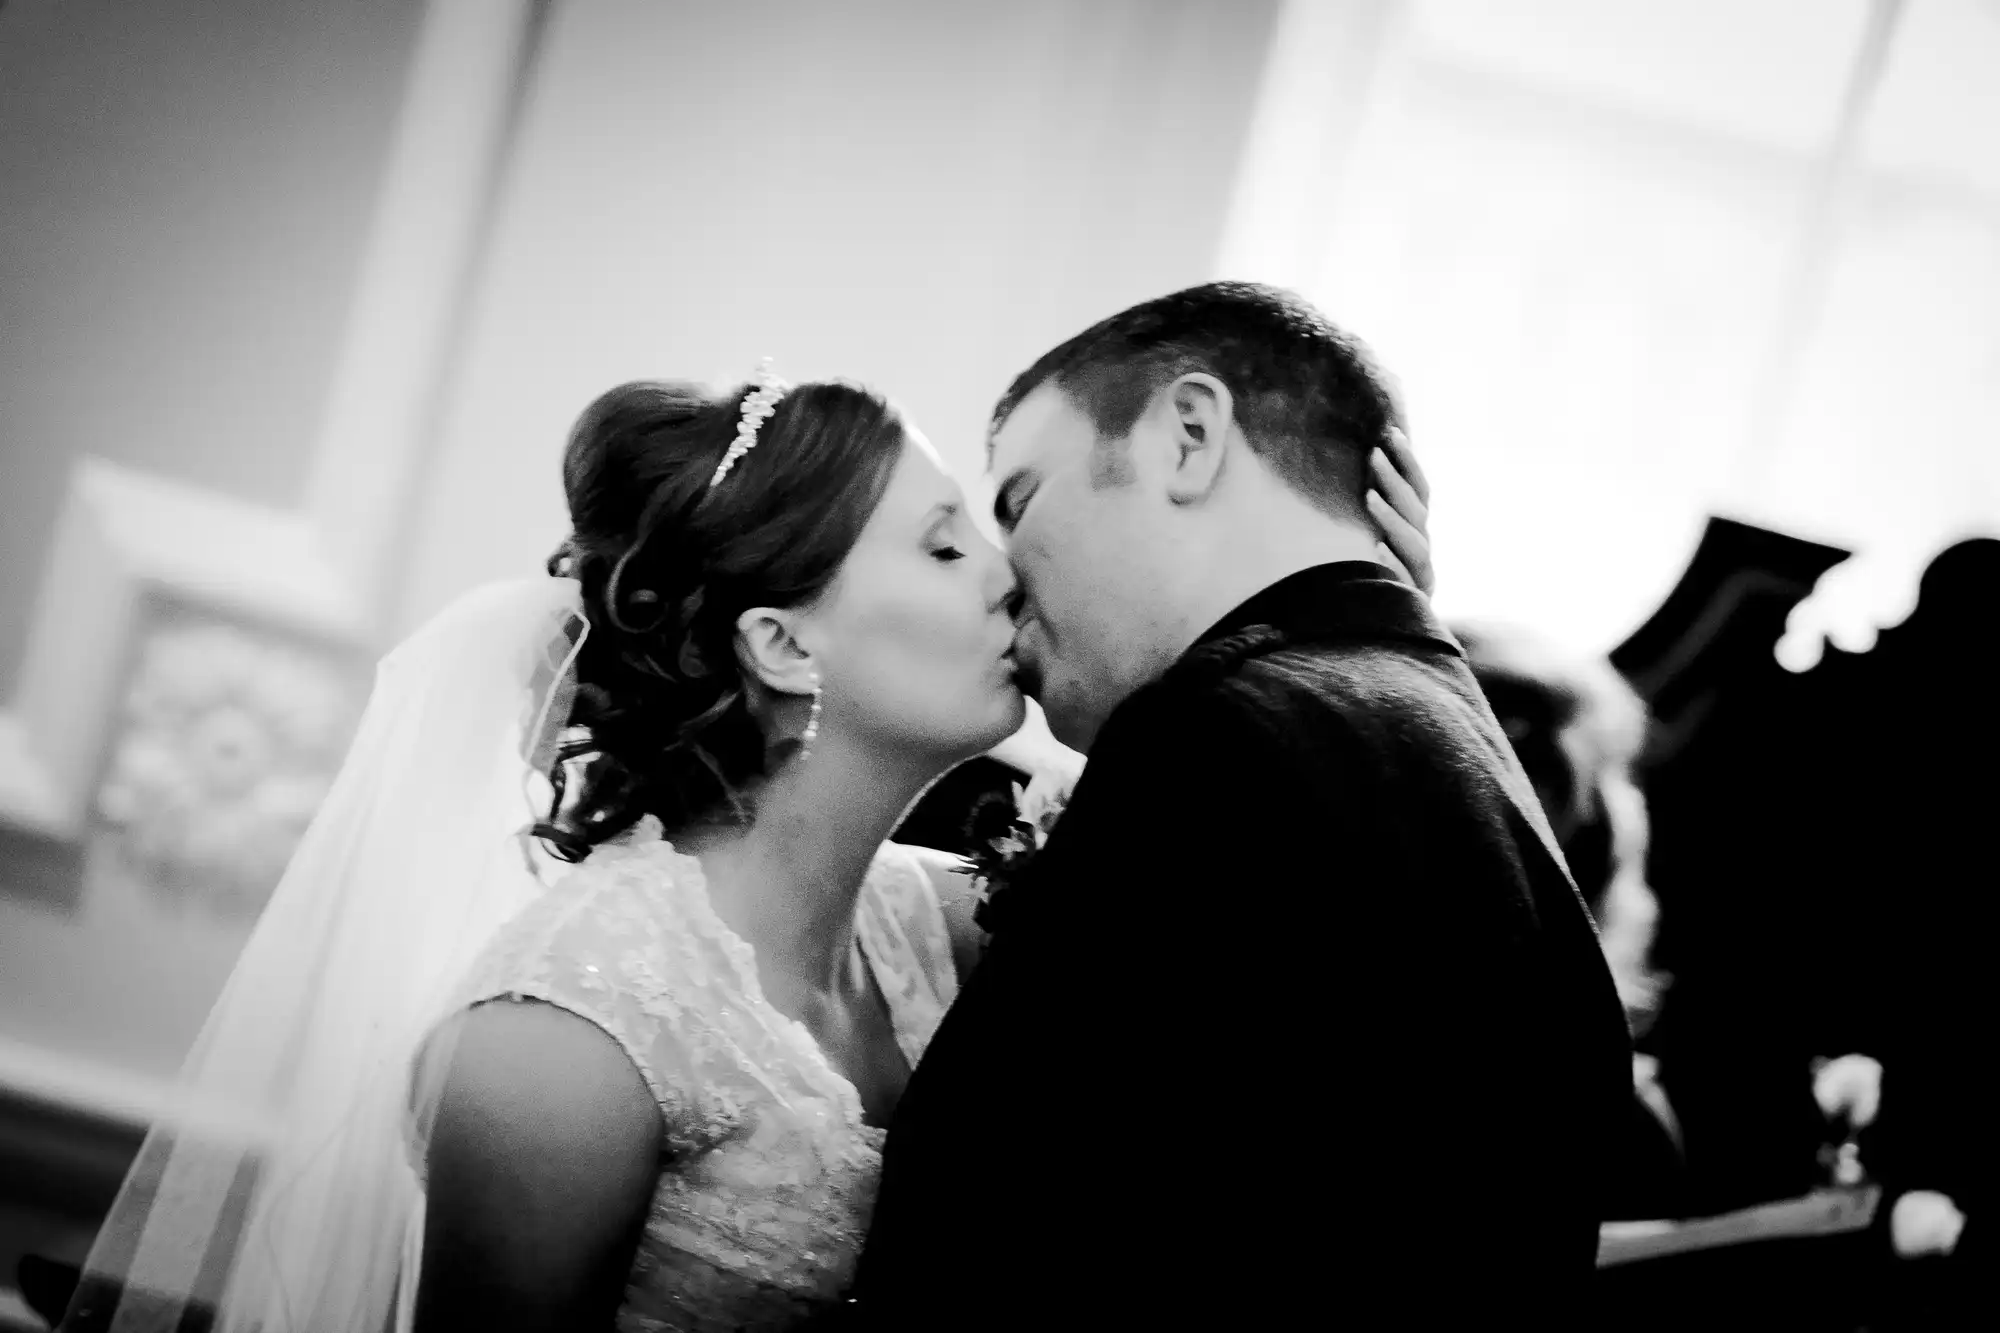 A bride and groom kissing, in black and white, at their wedding ceremony.